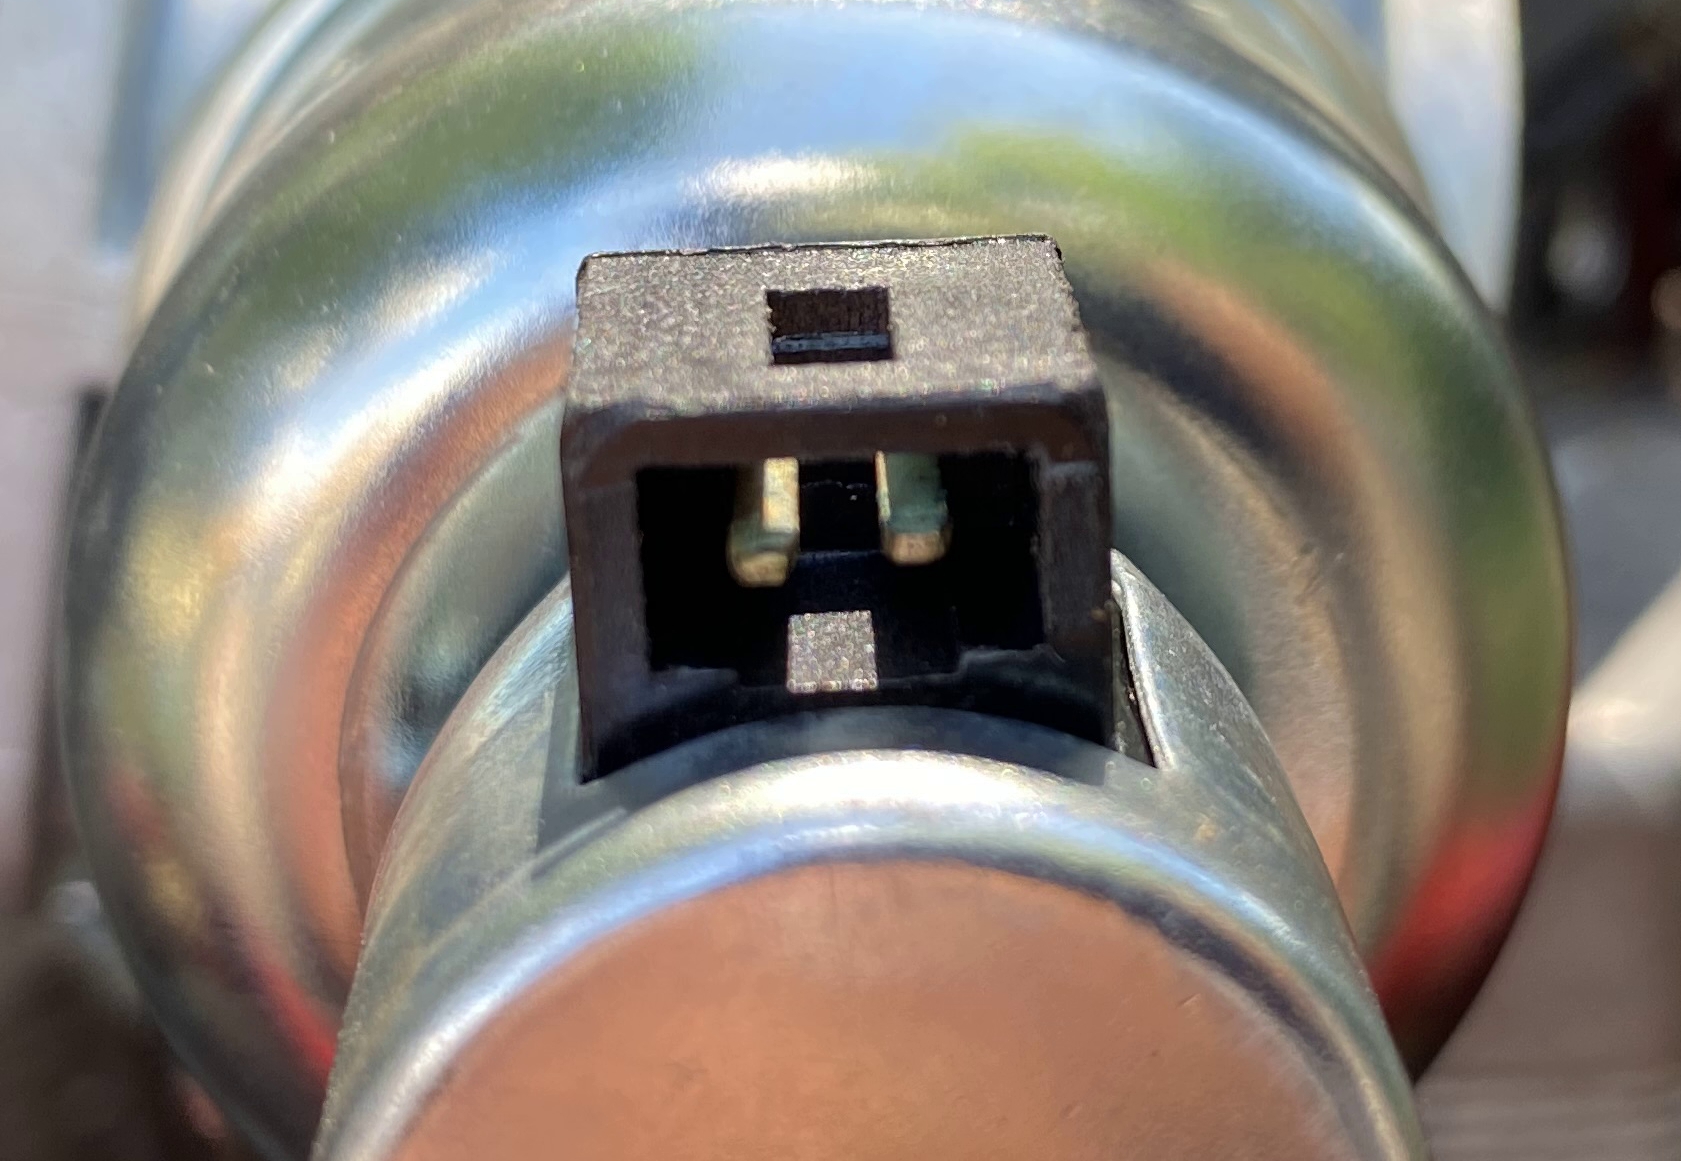 Carb rectangle electrical connection .jpg